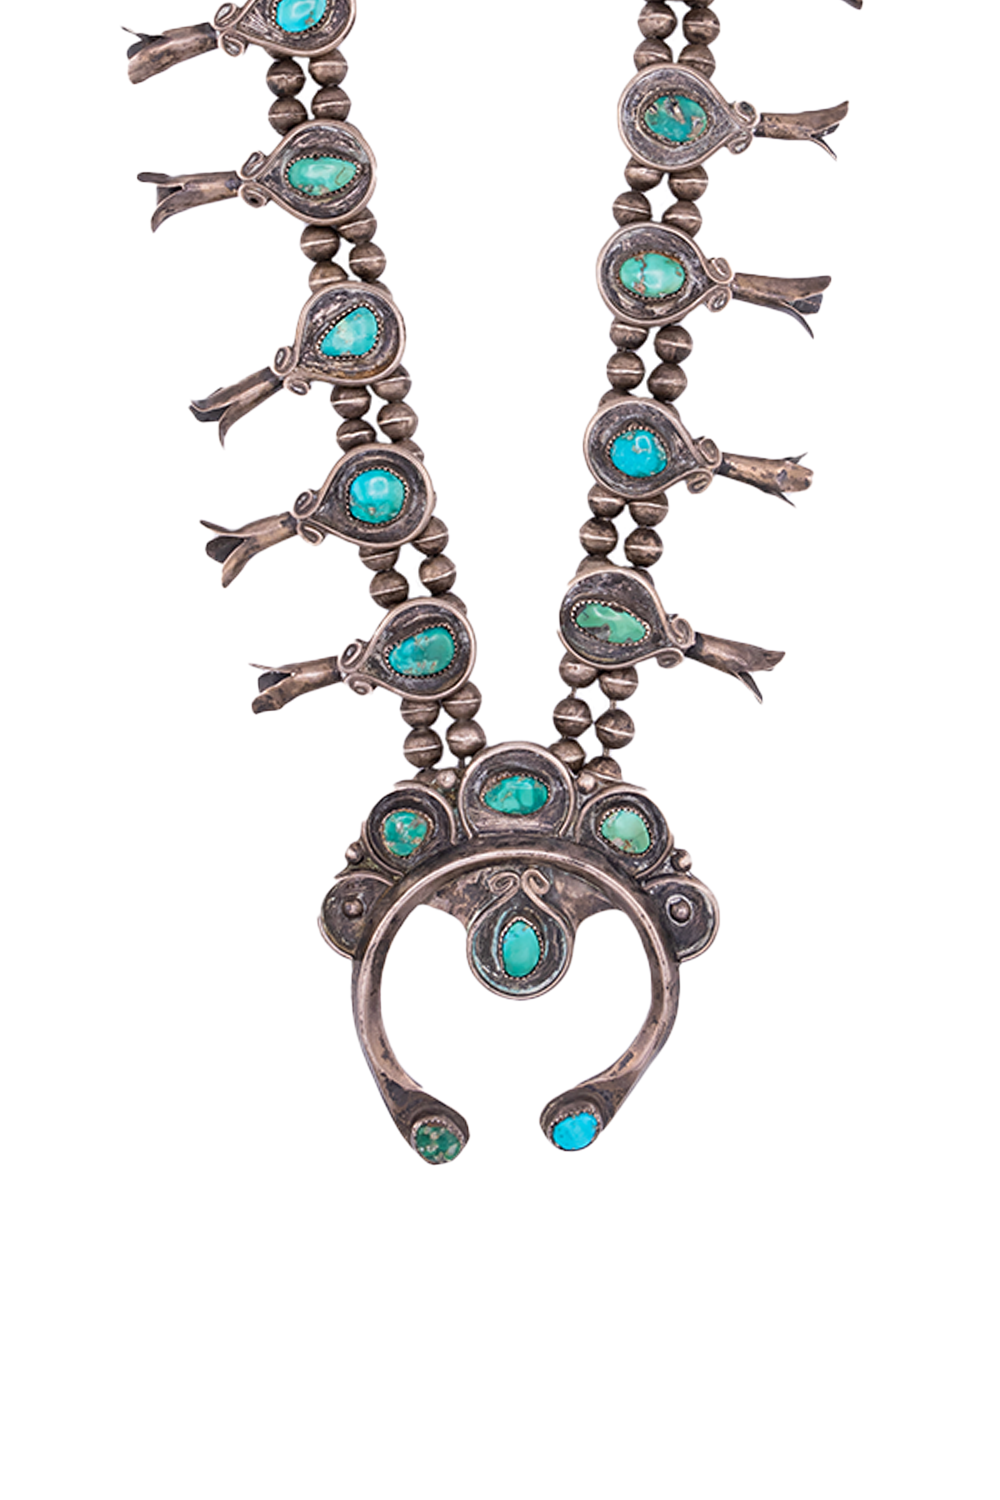 Navajo Old Pawn Squash Blossom Necklace Silver Beads With 12 Squash Blossoms And A Finely Figu Circa 1927